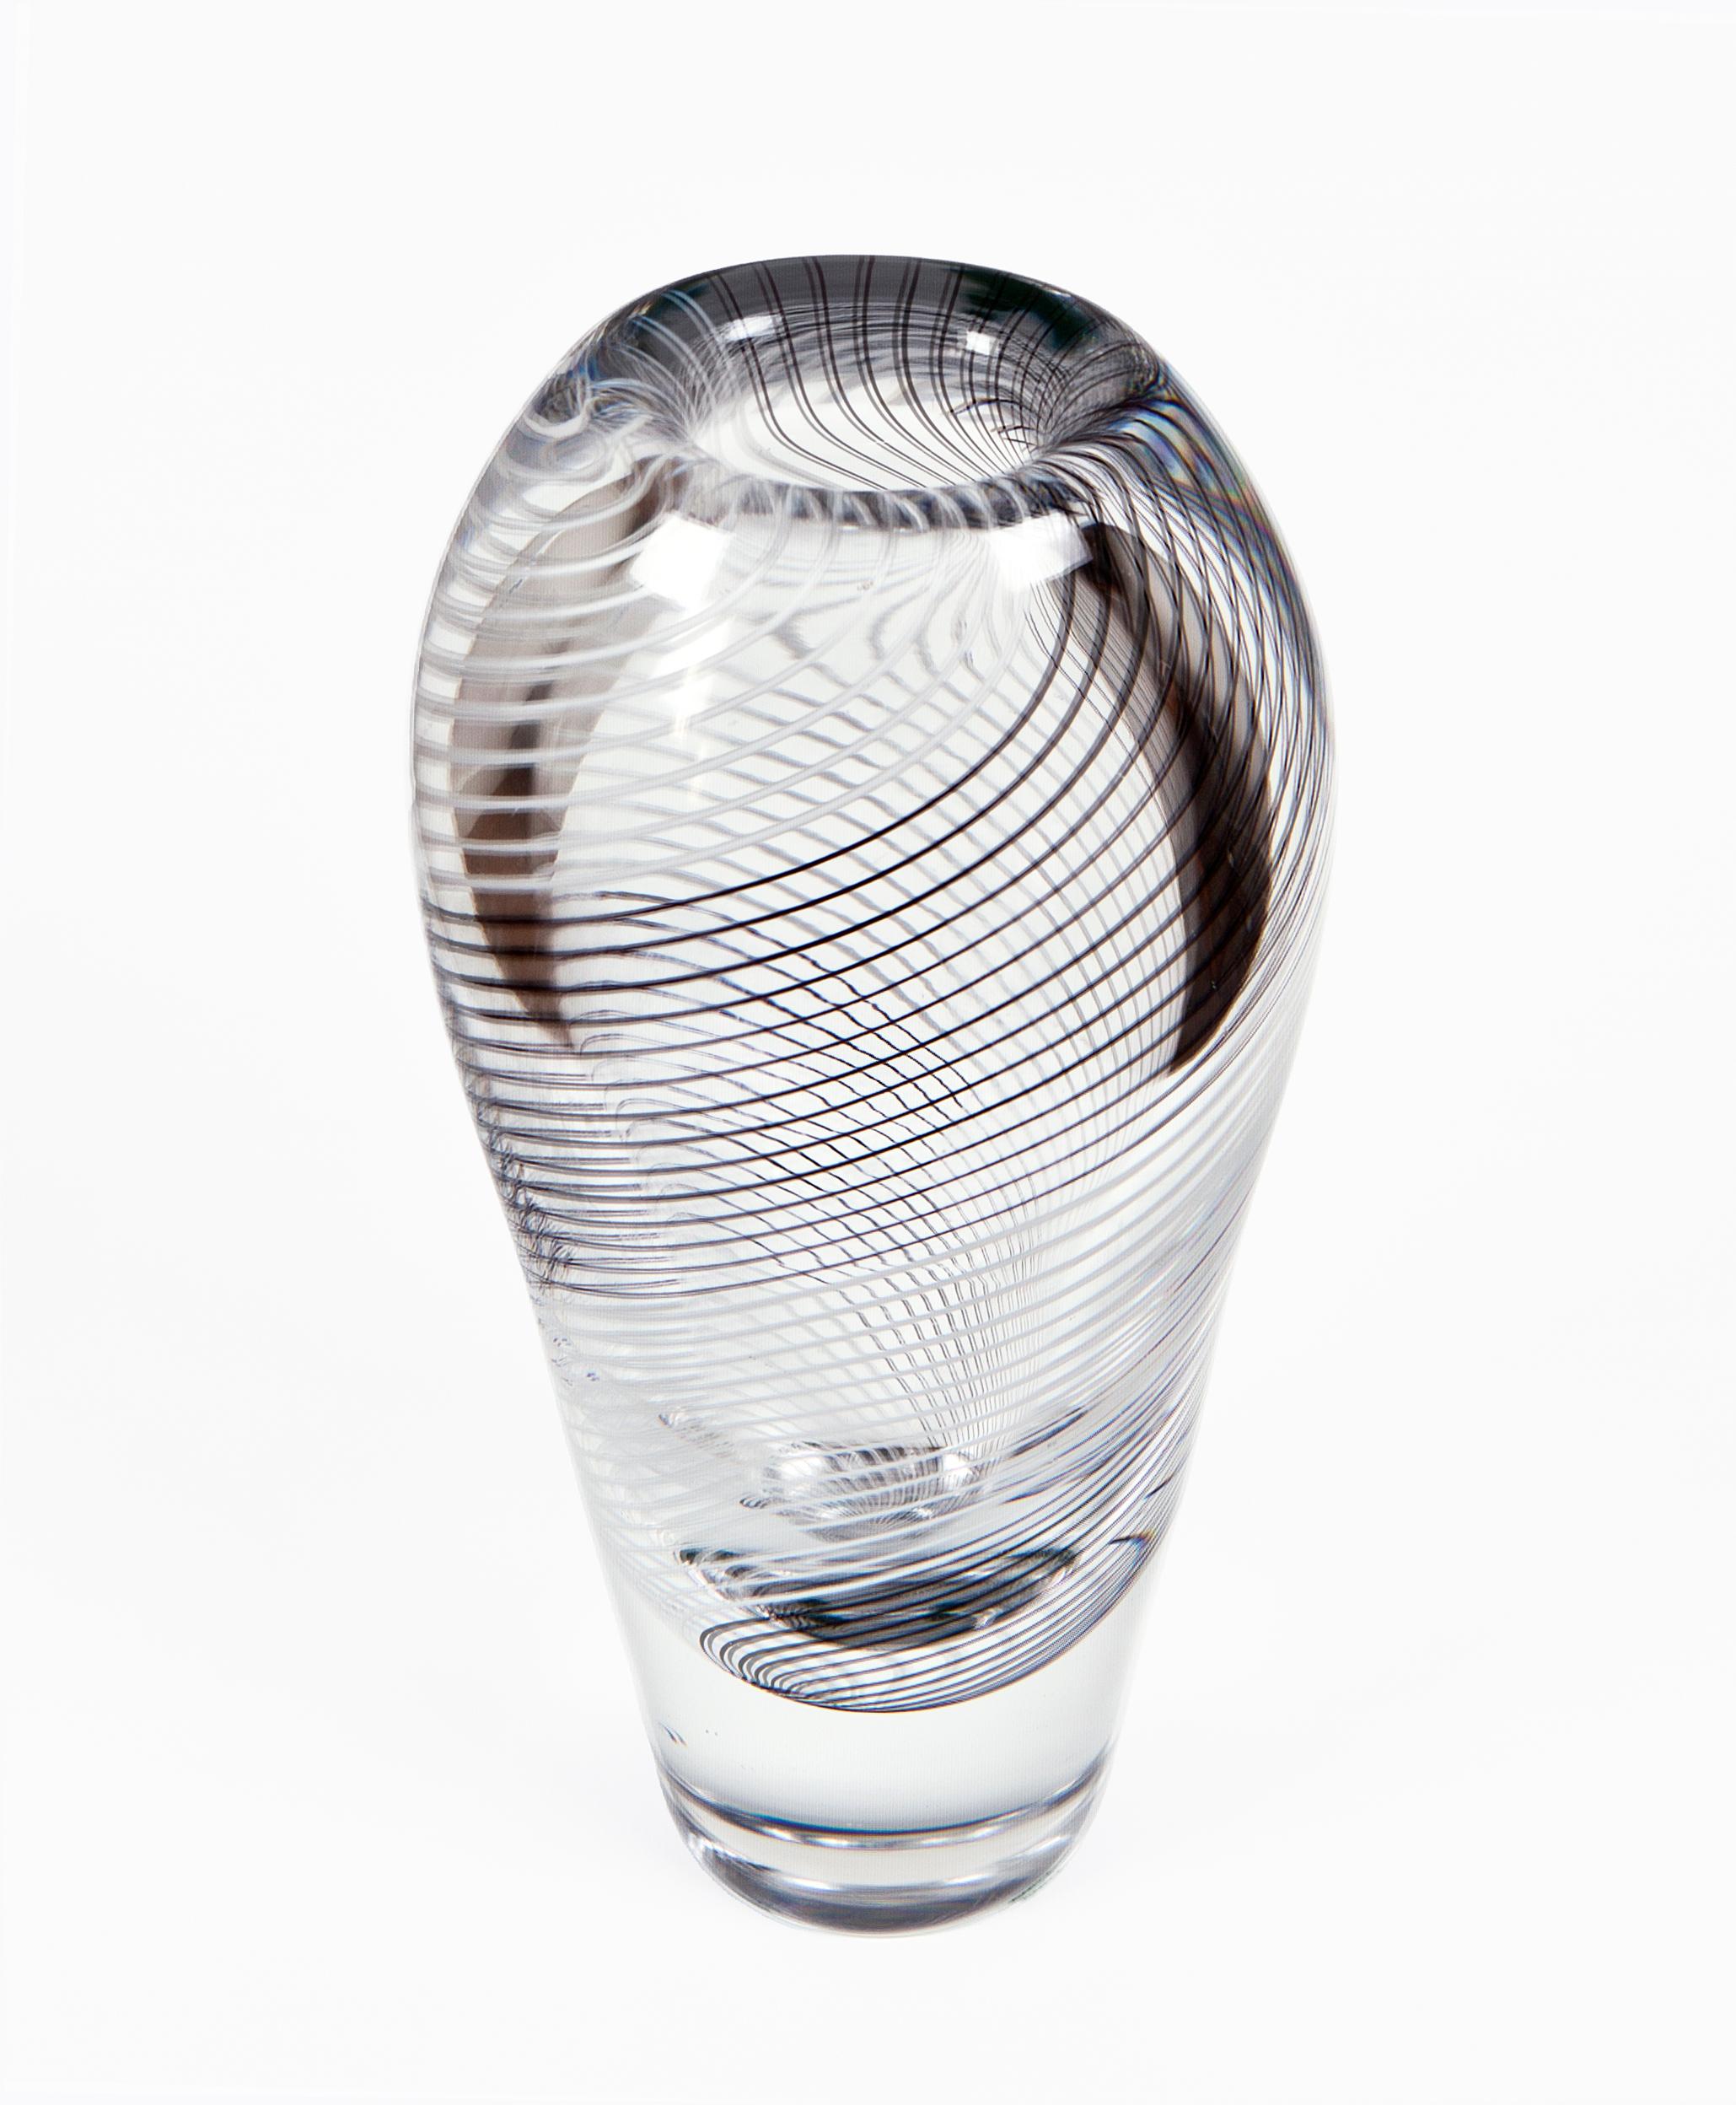 Clear Glass helicoidal pattern Vase by Vicke Lindstrand for Kosta. Sweden, 1960s.
Excellent condition used with slight traces of age and use.

Lindstrand was a Swedish glass, textile and fabric designer and painter. Considered pioneer in Swedish